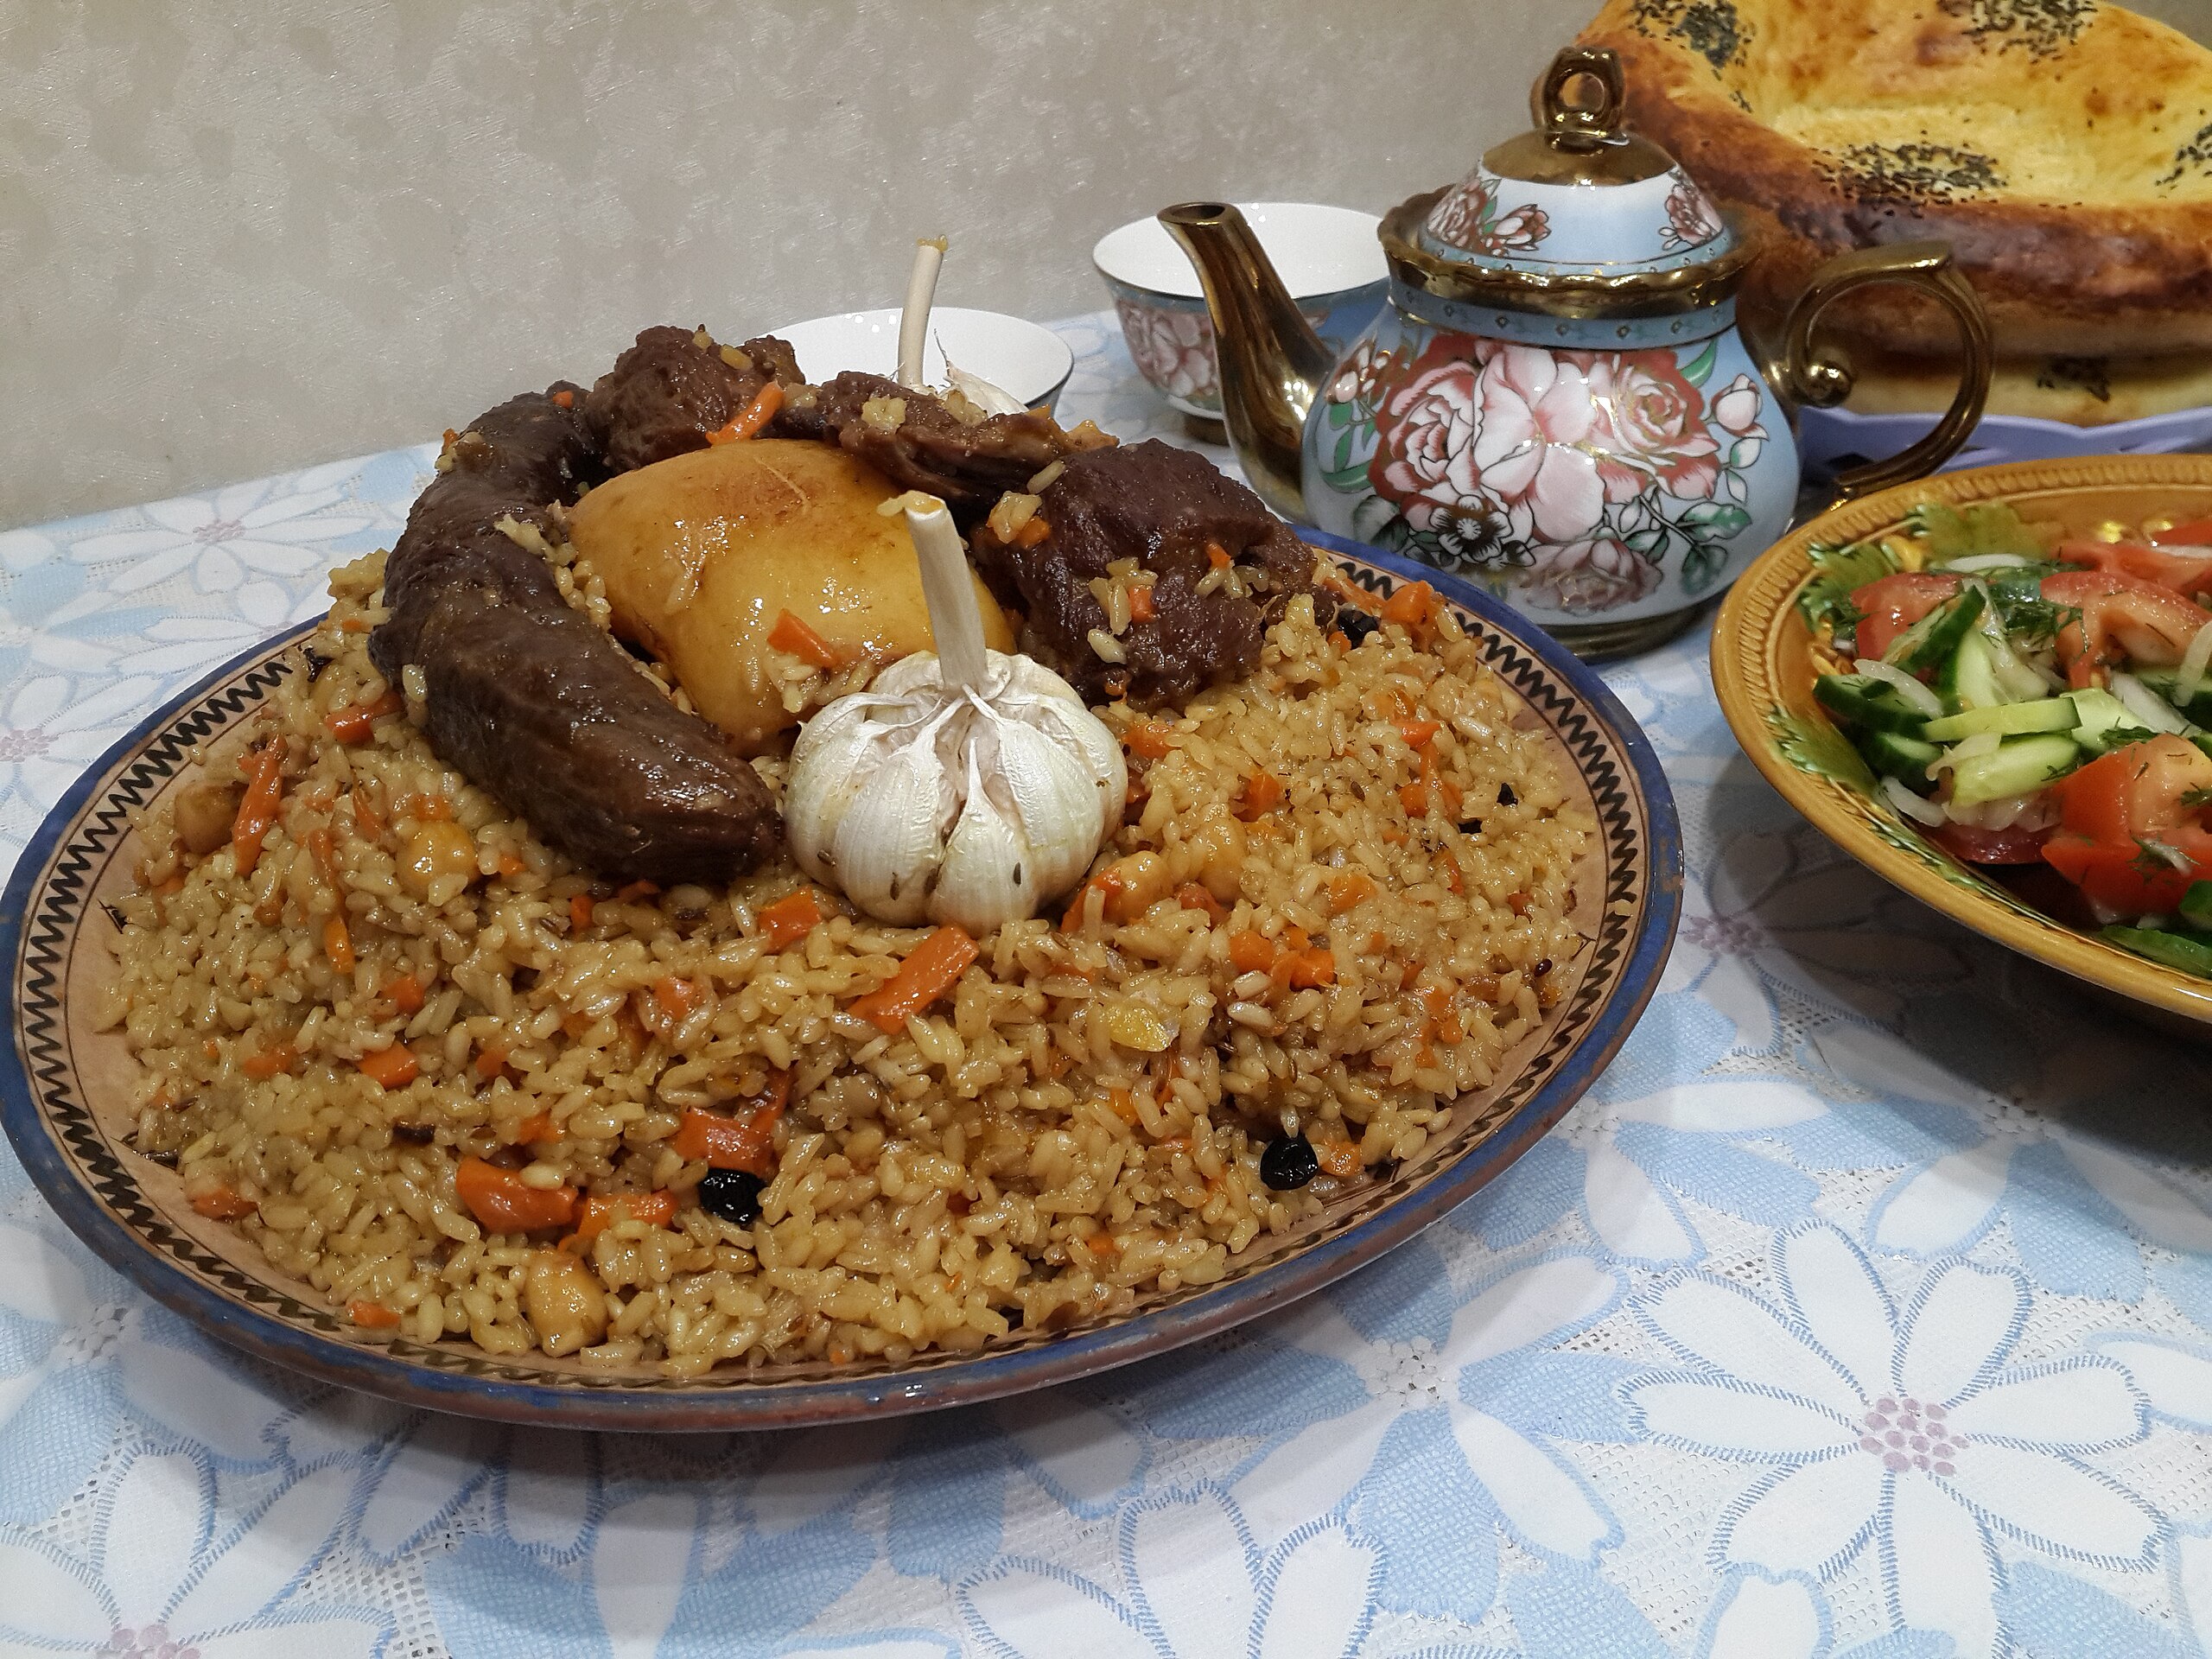 Of our daily plov